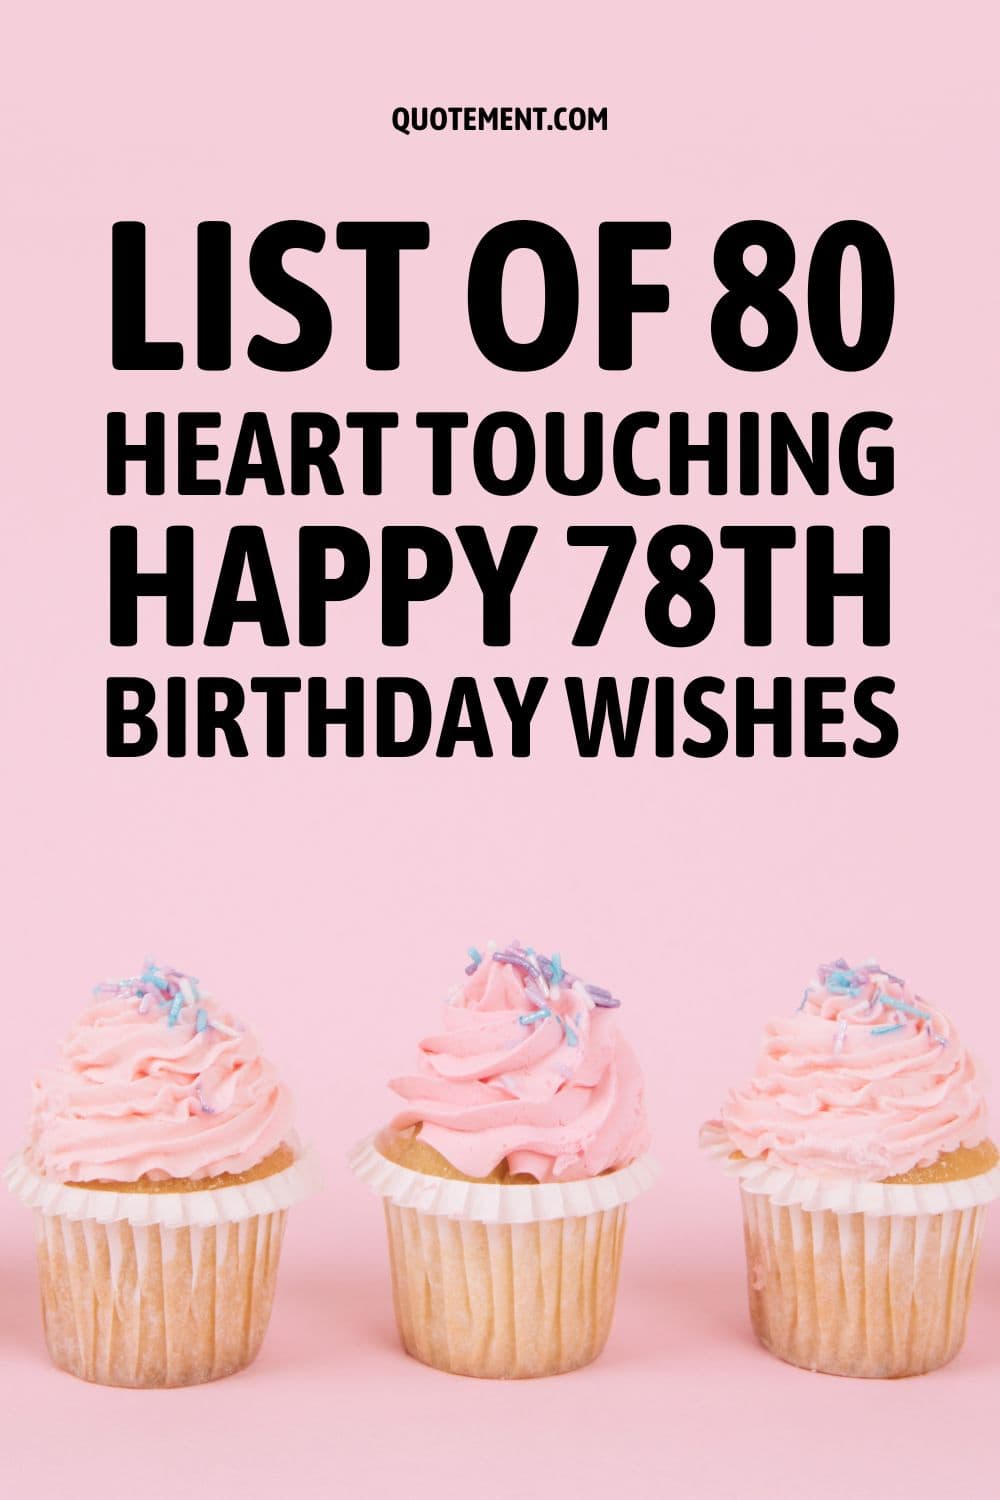 List Of 80 Heart Touching Happy 78th Birthday Wishes
